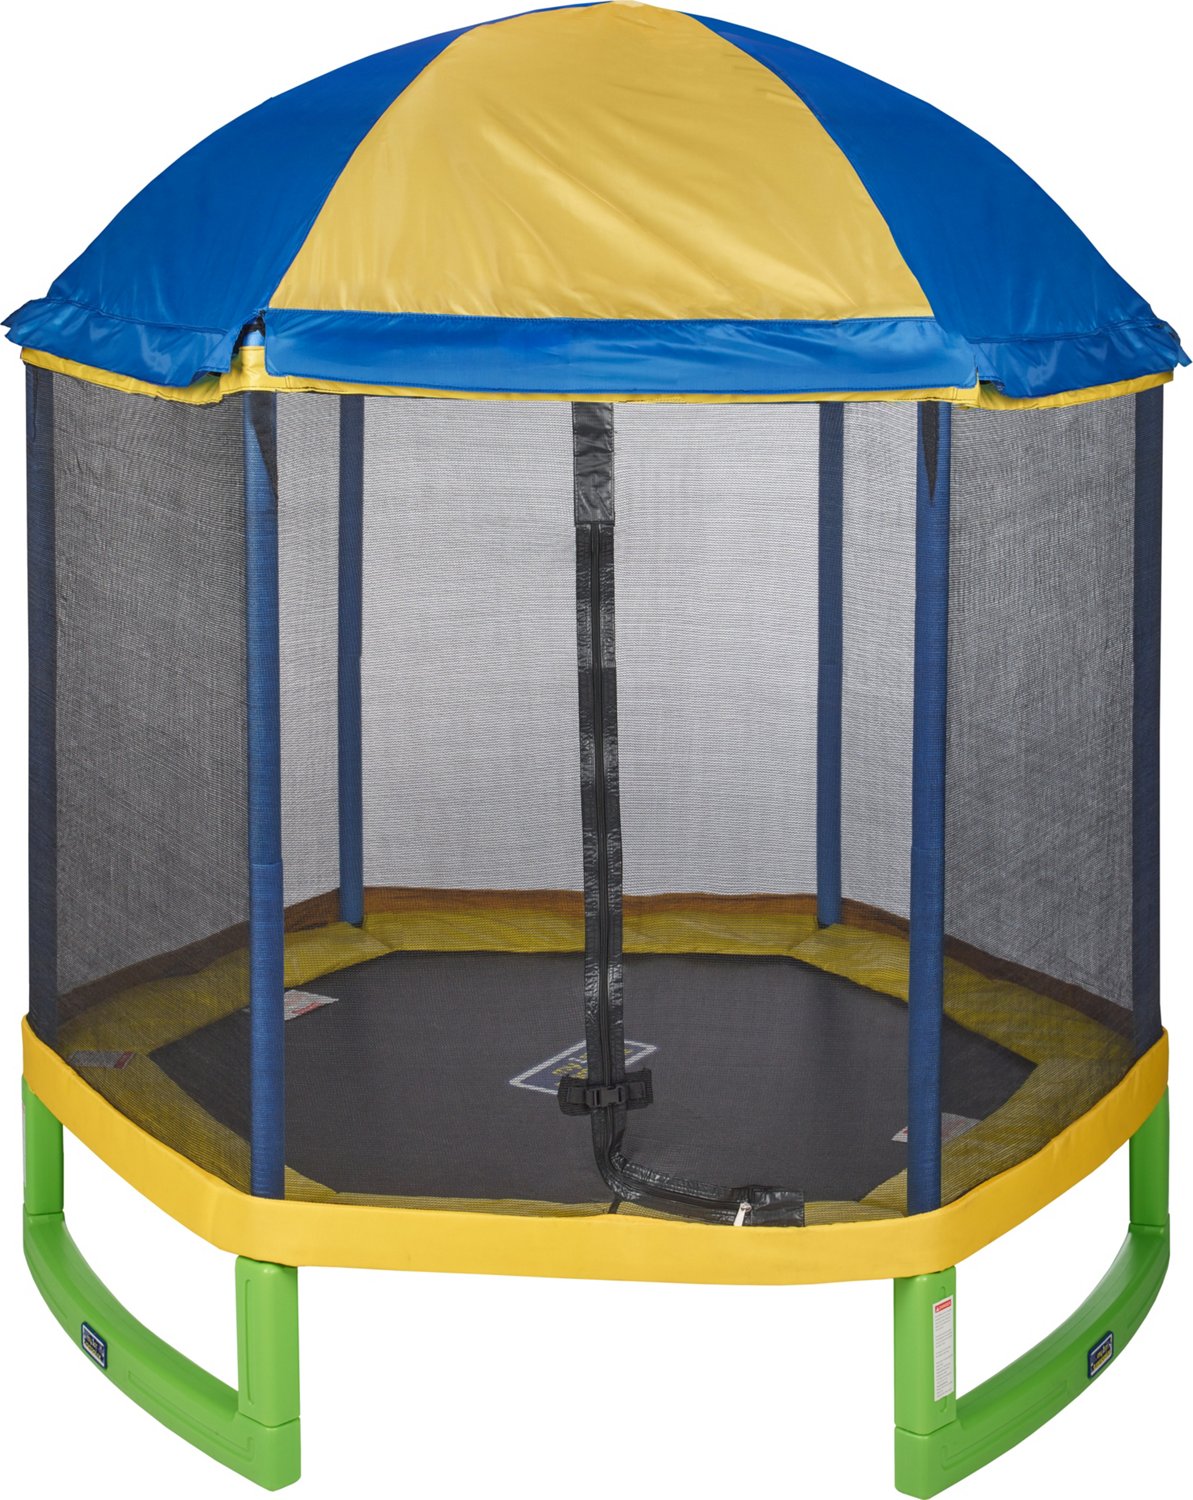 Tap Grundig Shaded AGame My First 7 ft Trampoline with Tent Top Enclosure | Academy